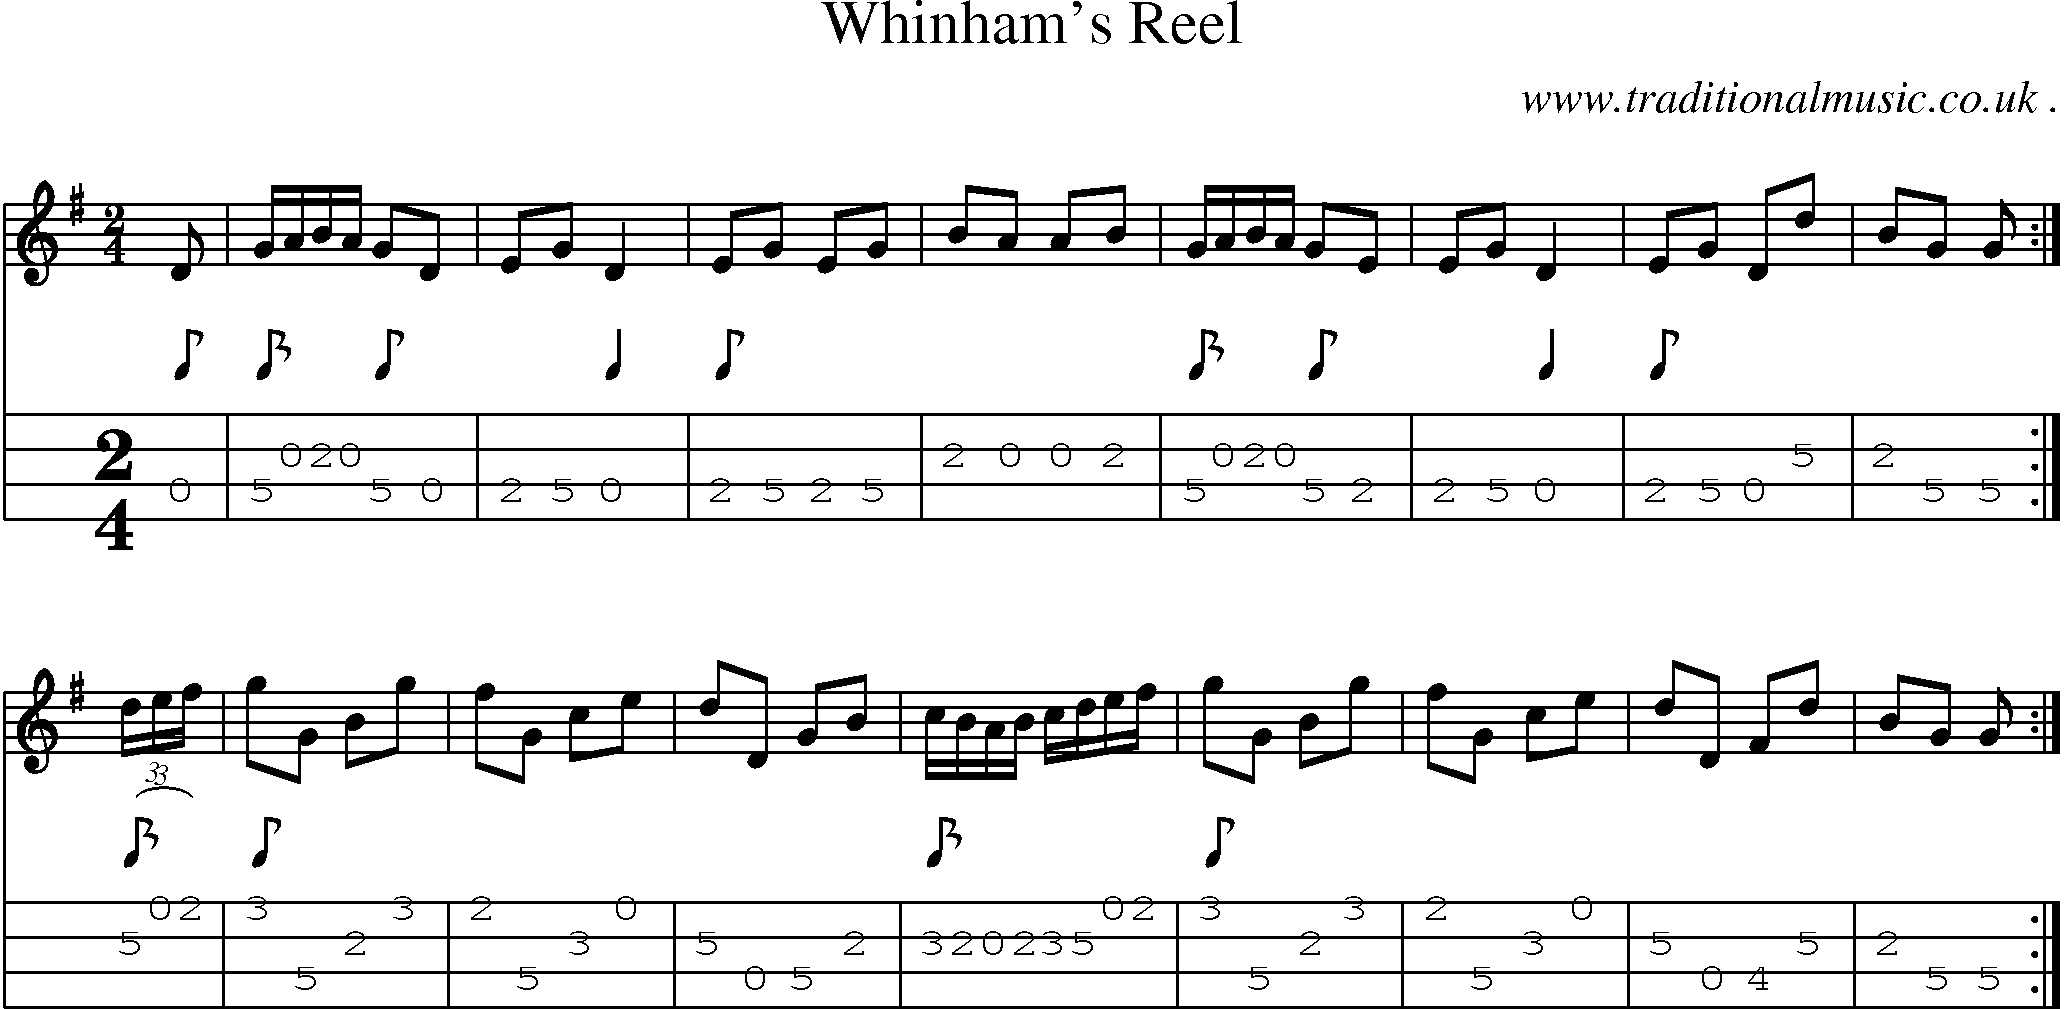 Sheet-music  score, Chords and Mandolin Tabs for Whinhams Reel